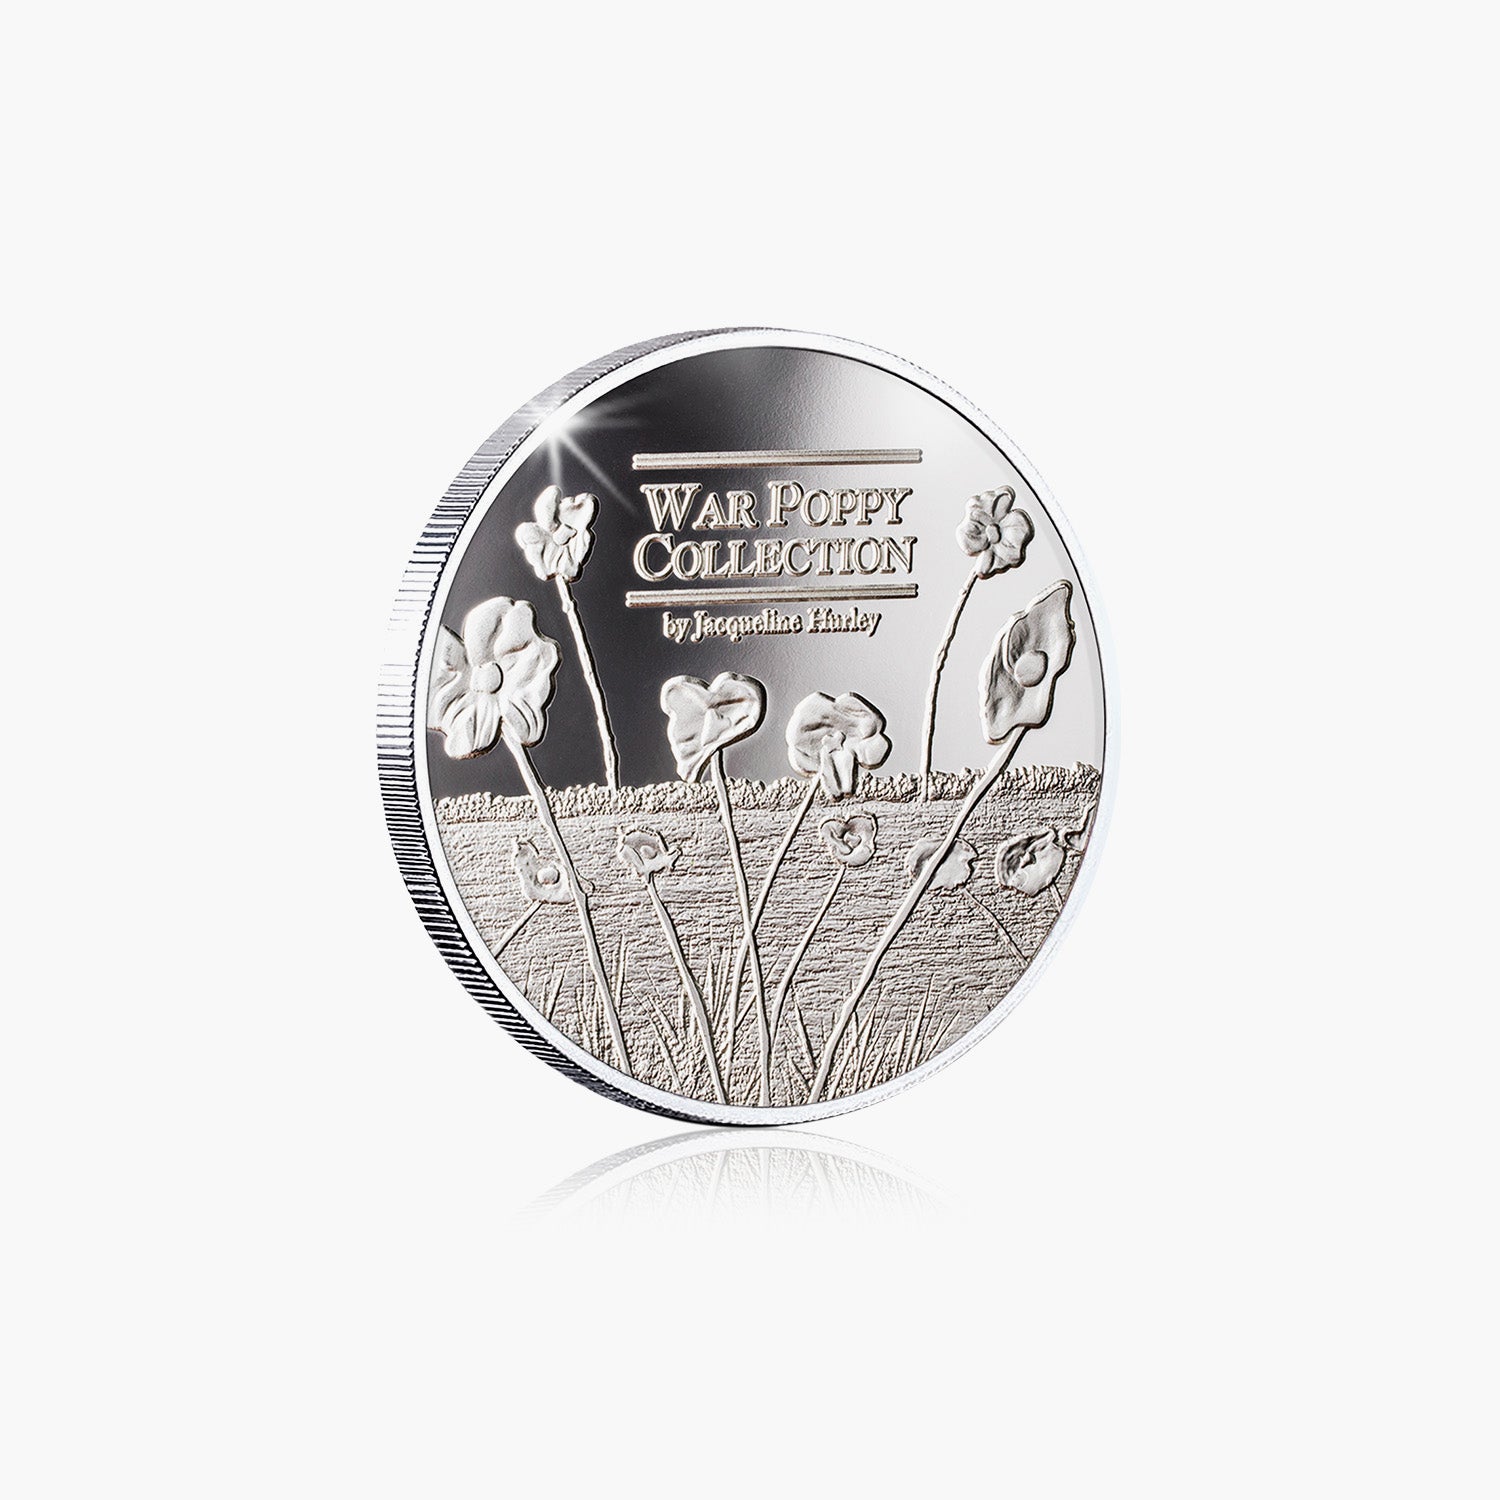 From Freedom's Land Silver-Plated Commemorative